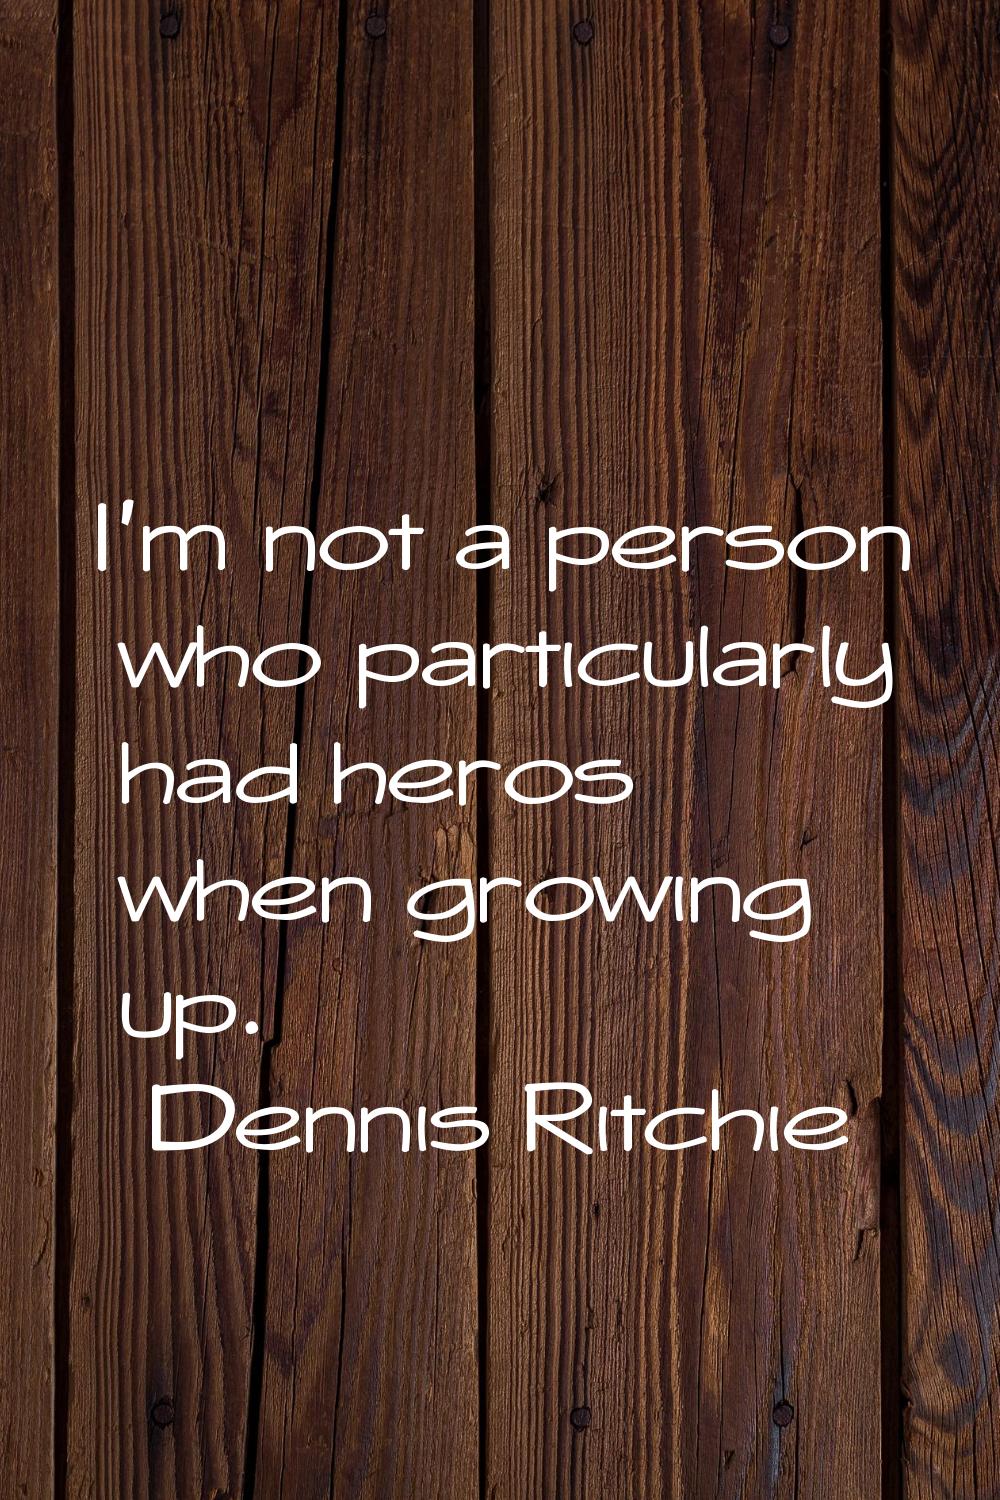 I'm not a person who particularly had heros when growing up.